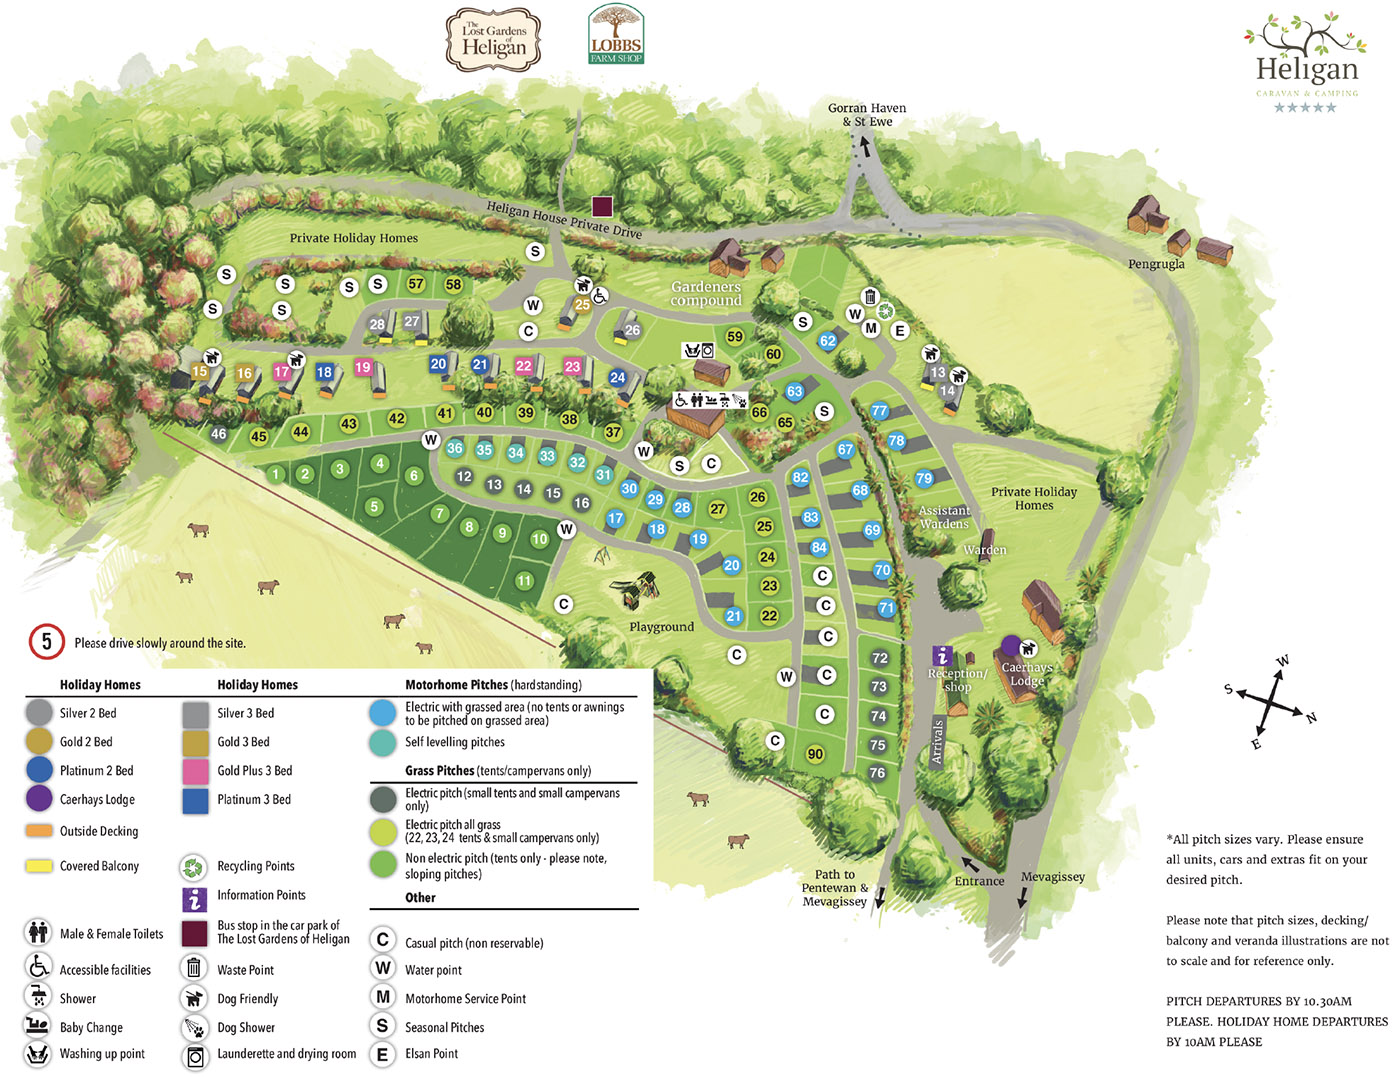 Heligan Woods park layout